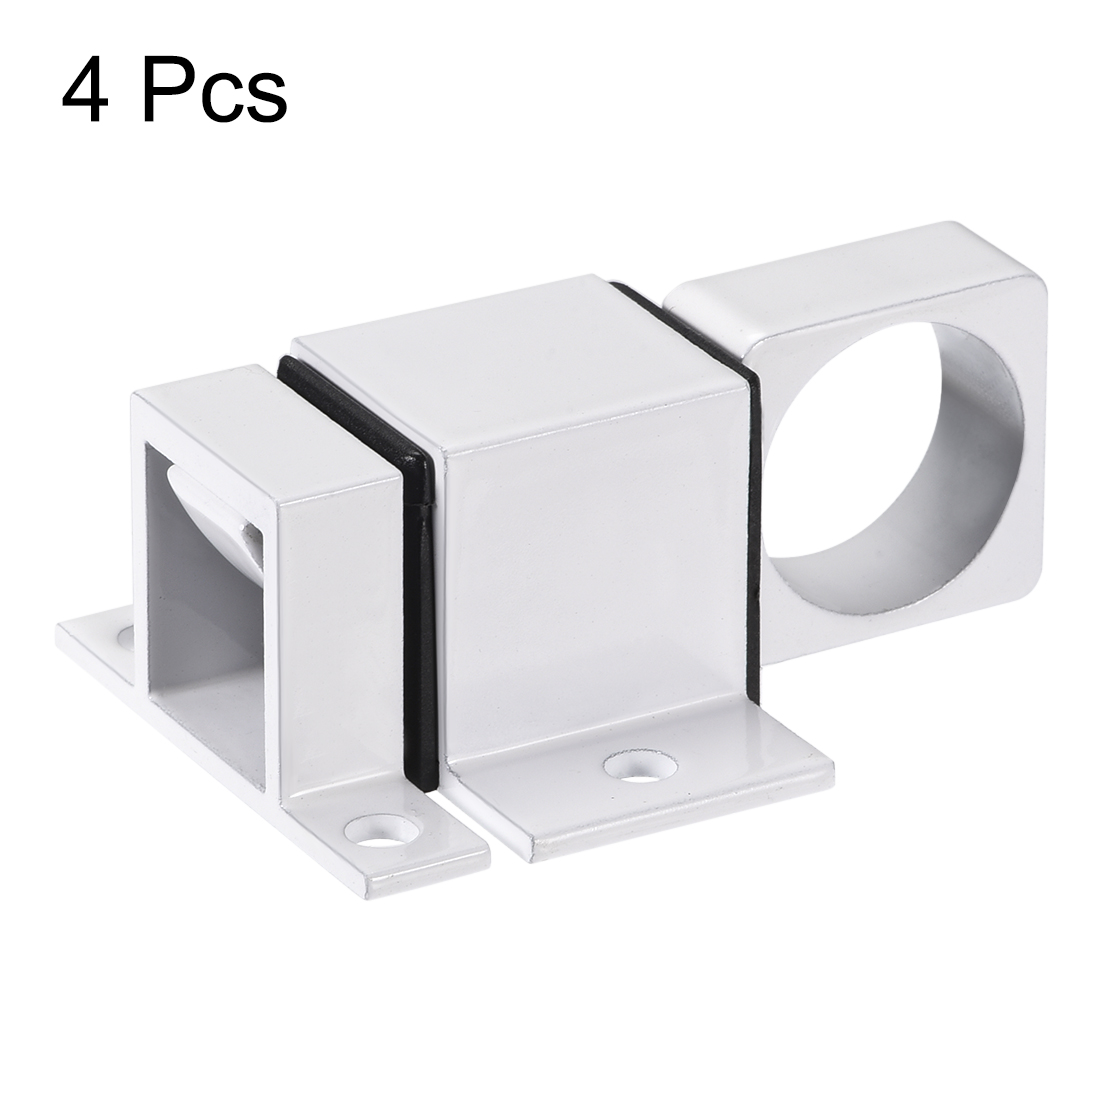 uxcell Door Bolt Latch, Aluminum Alloy Security Automatic Window Gate Spring Bounce Lock, 4 Pcs (White)